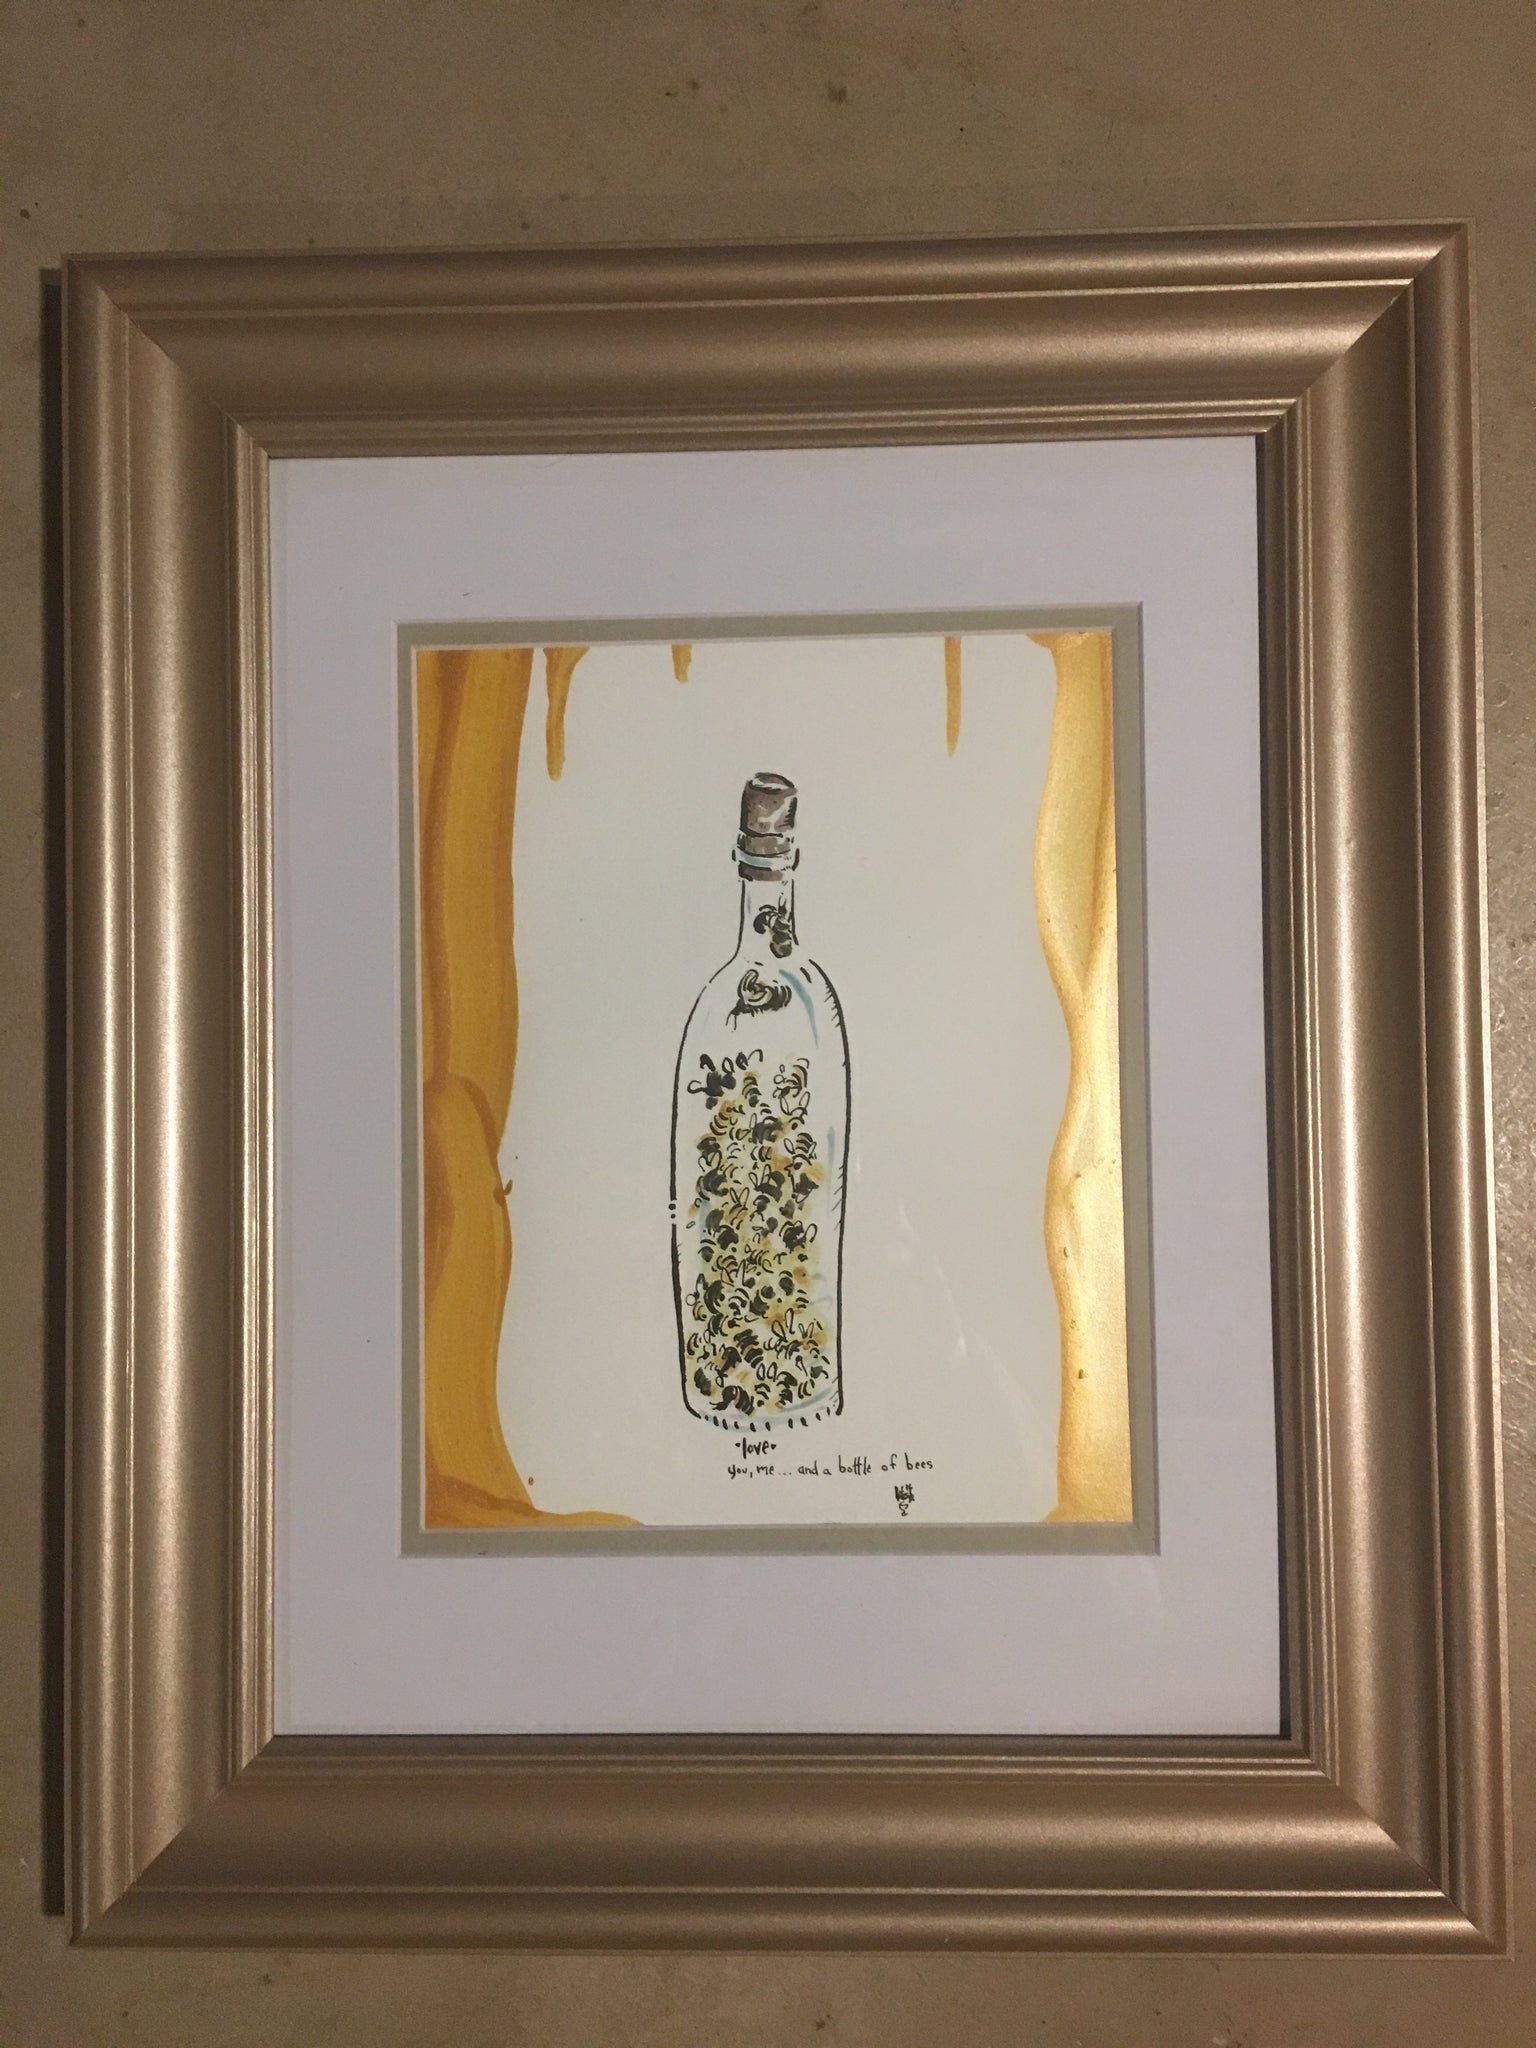 You, me and a bottle of bees, Winespot-framed